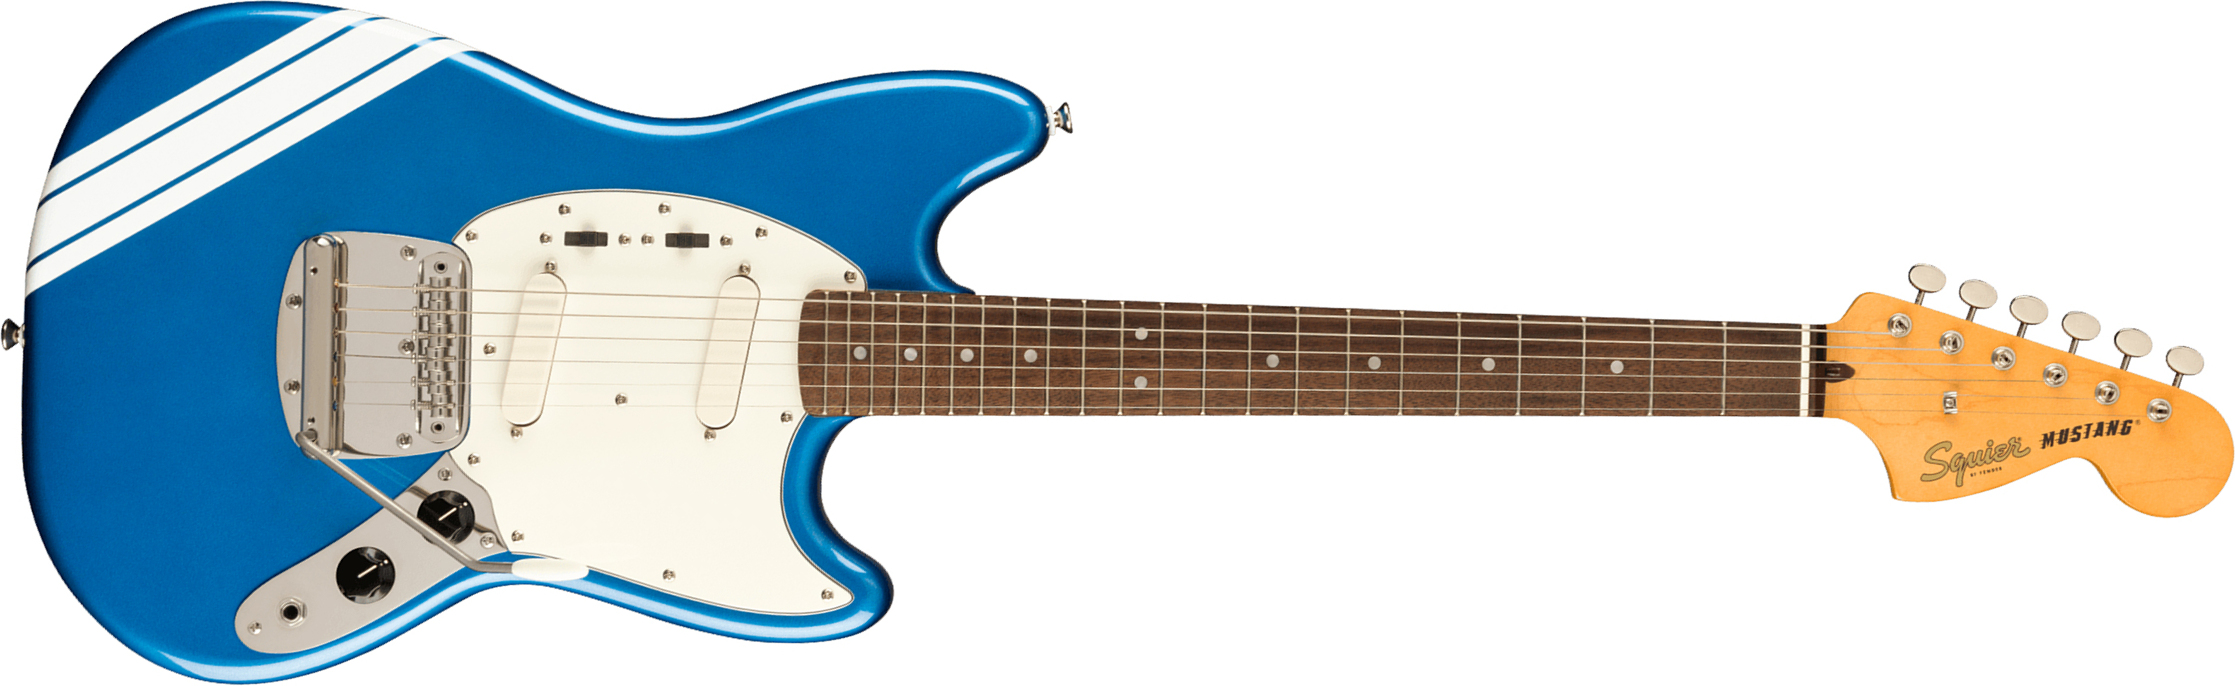 Squier Mustang  Classic Vibe 60s Competition Fsr Ltd Lau - Lake Placid Blue W/ Olympic White Stripes - Retro rock electric guitar - Main picture